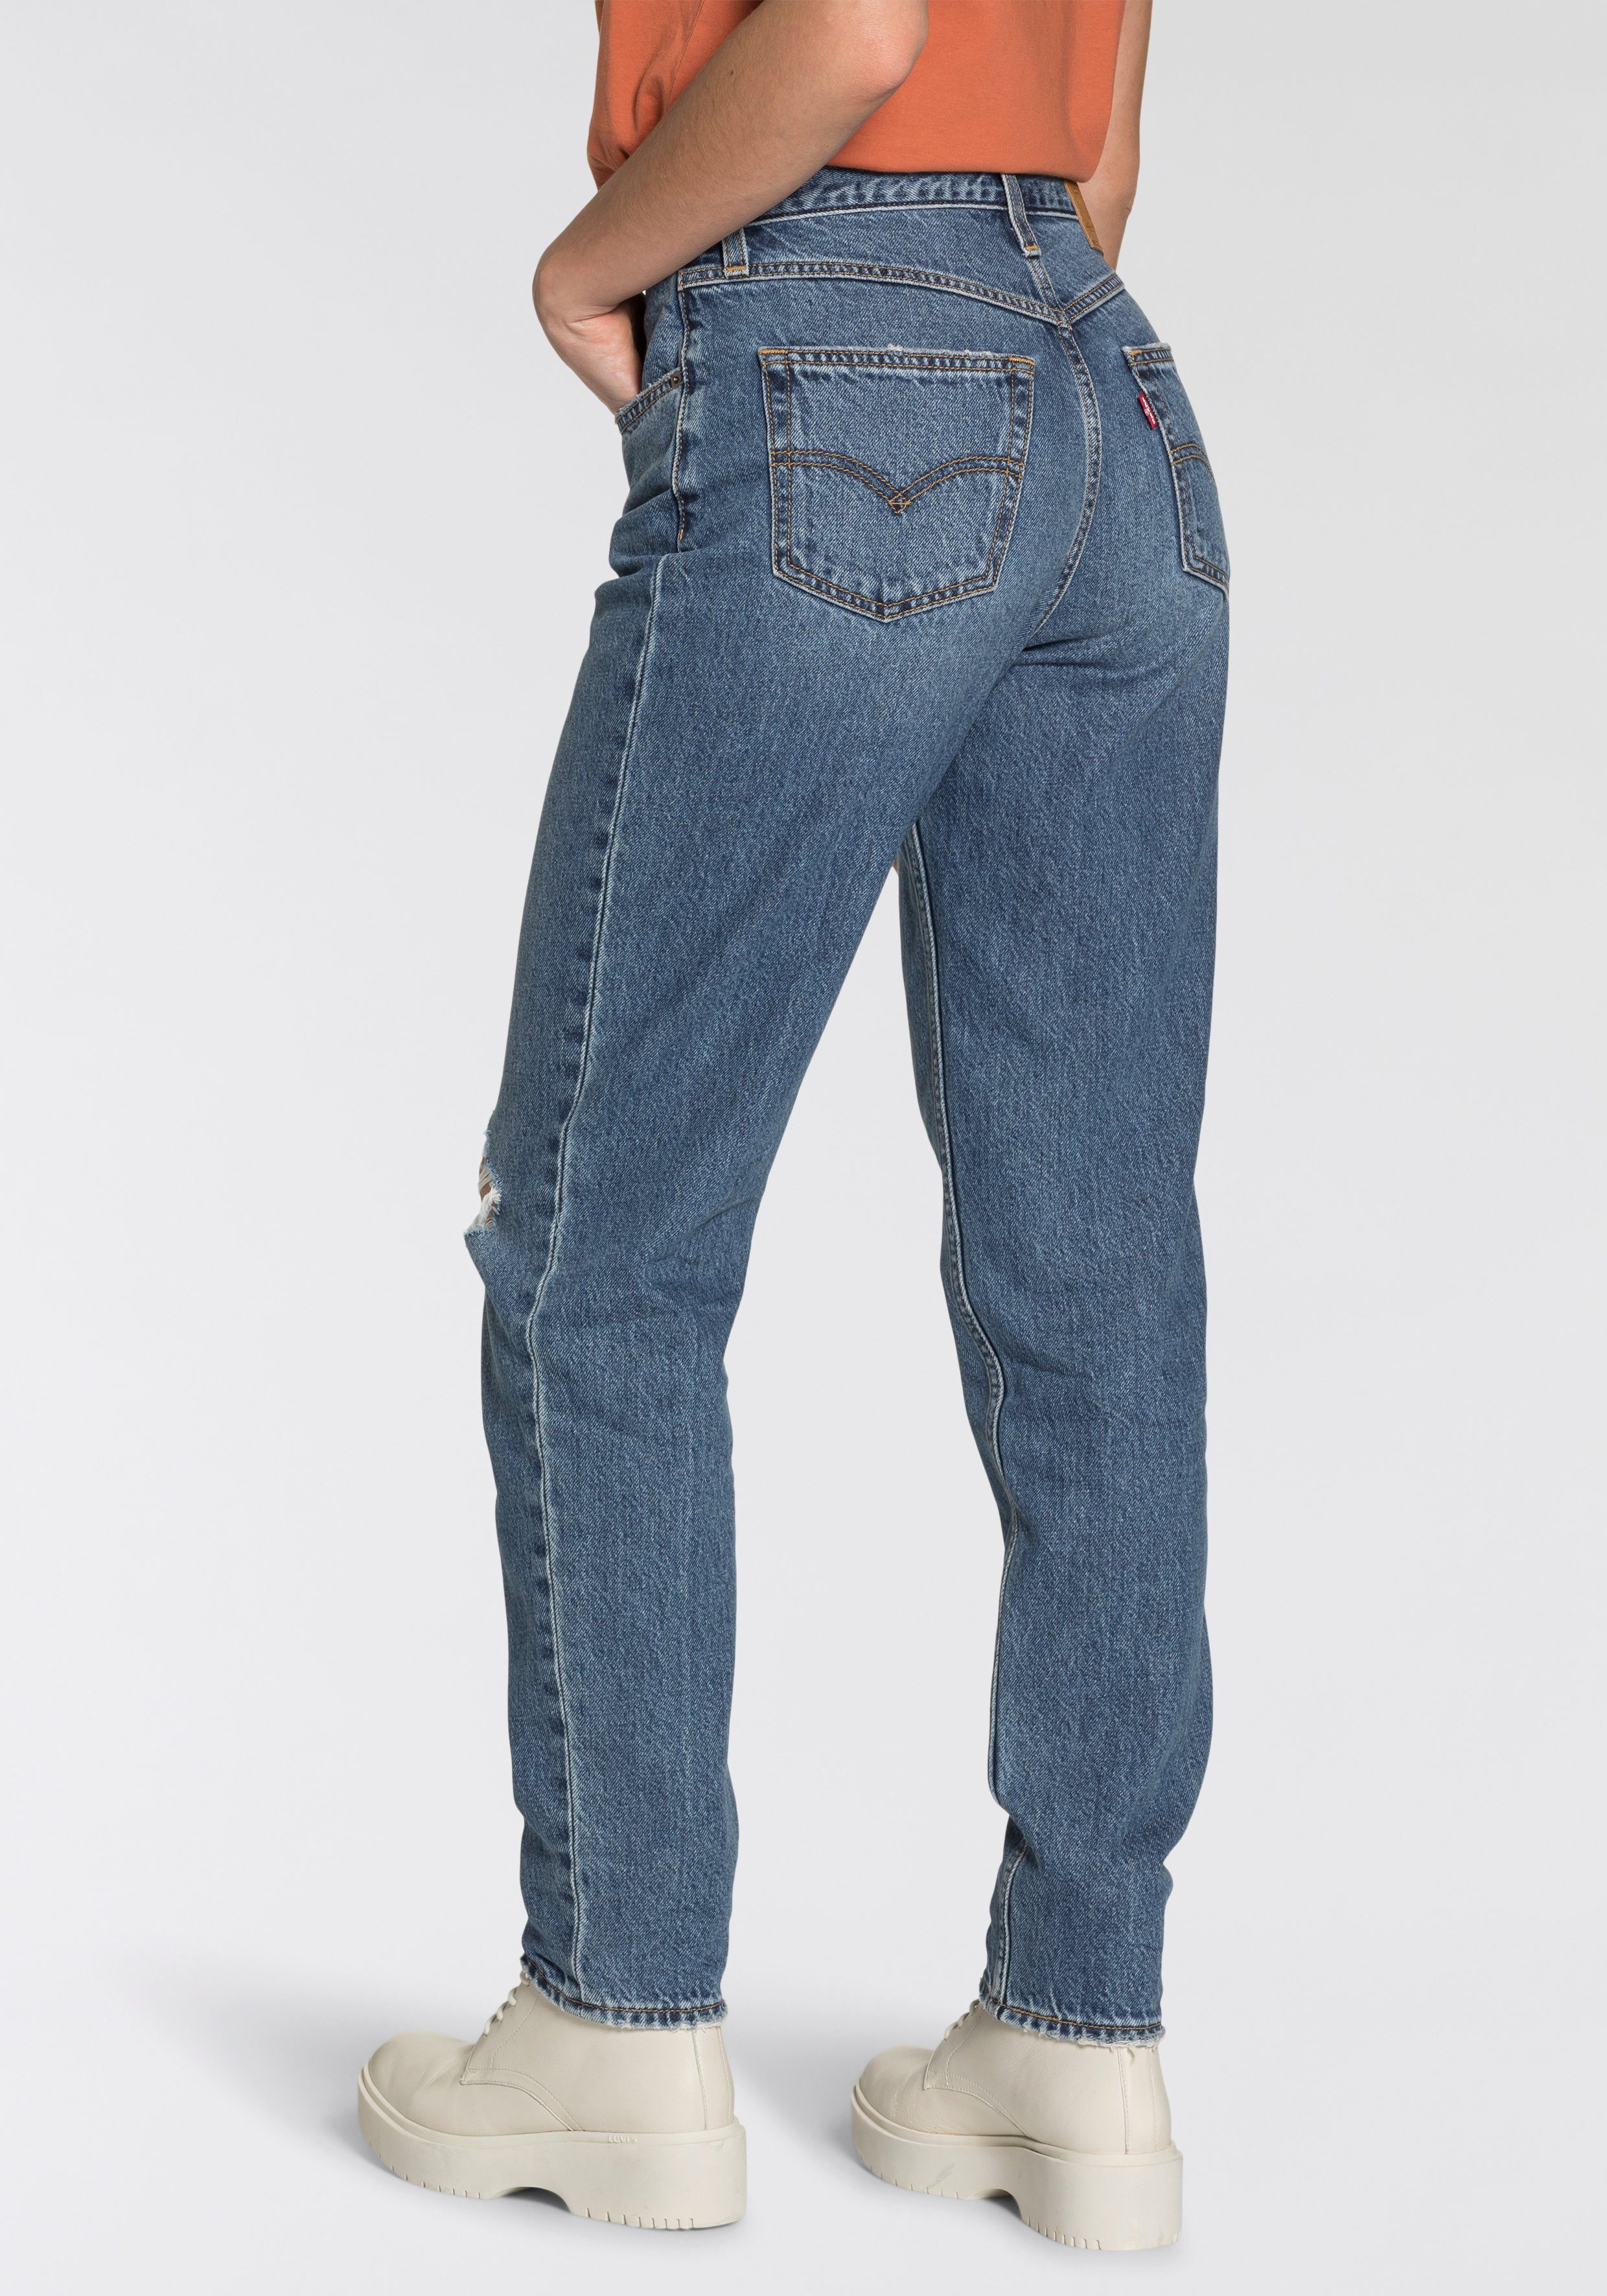 JEANS denim MOM 80S mid-blue Mom-Jeans Levi's®